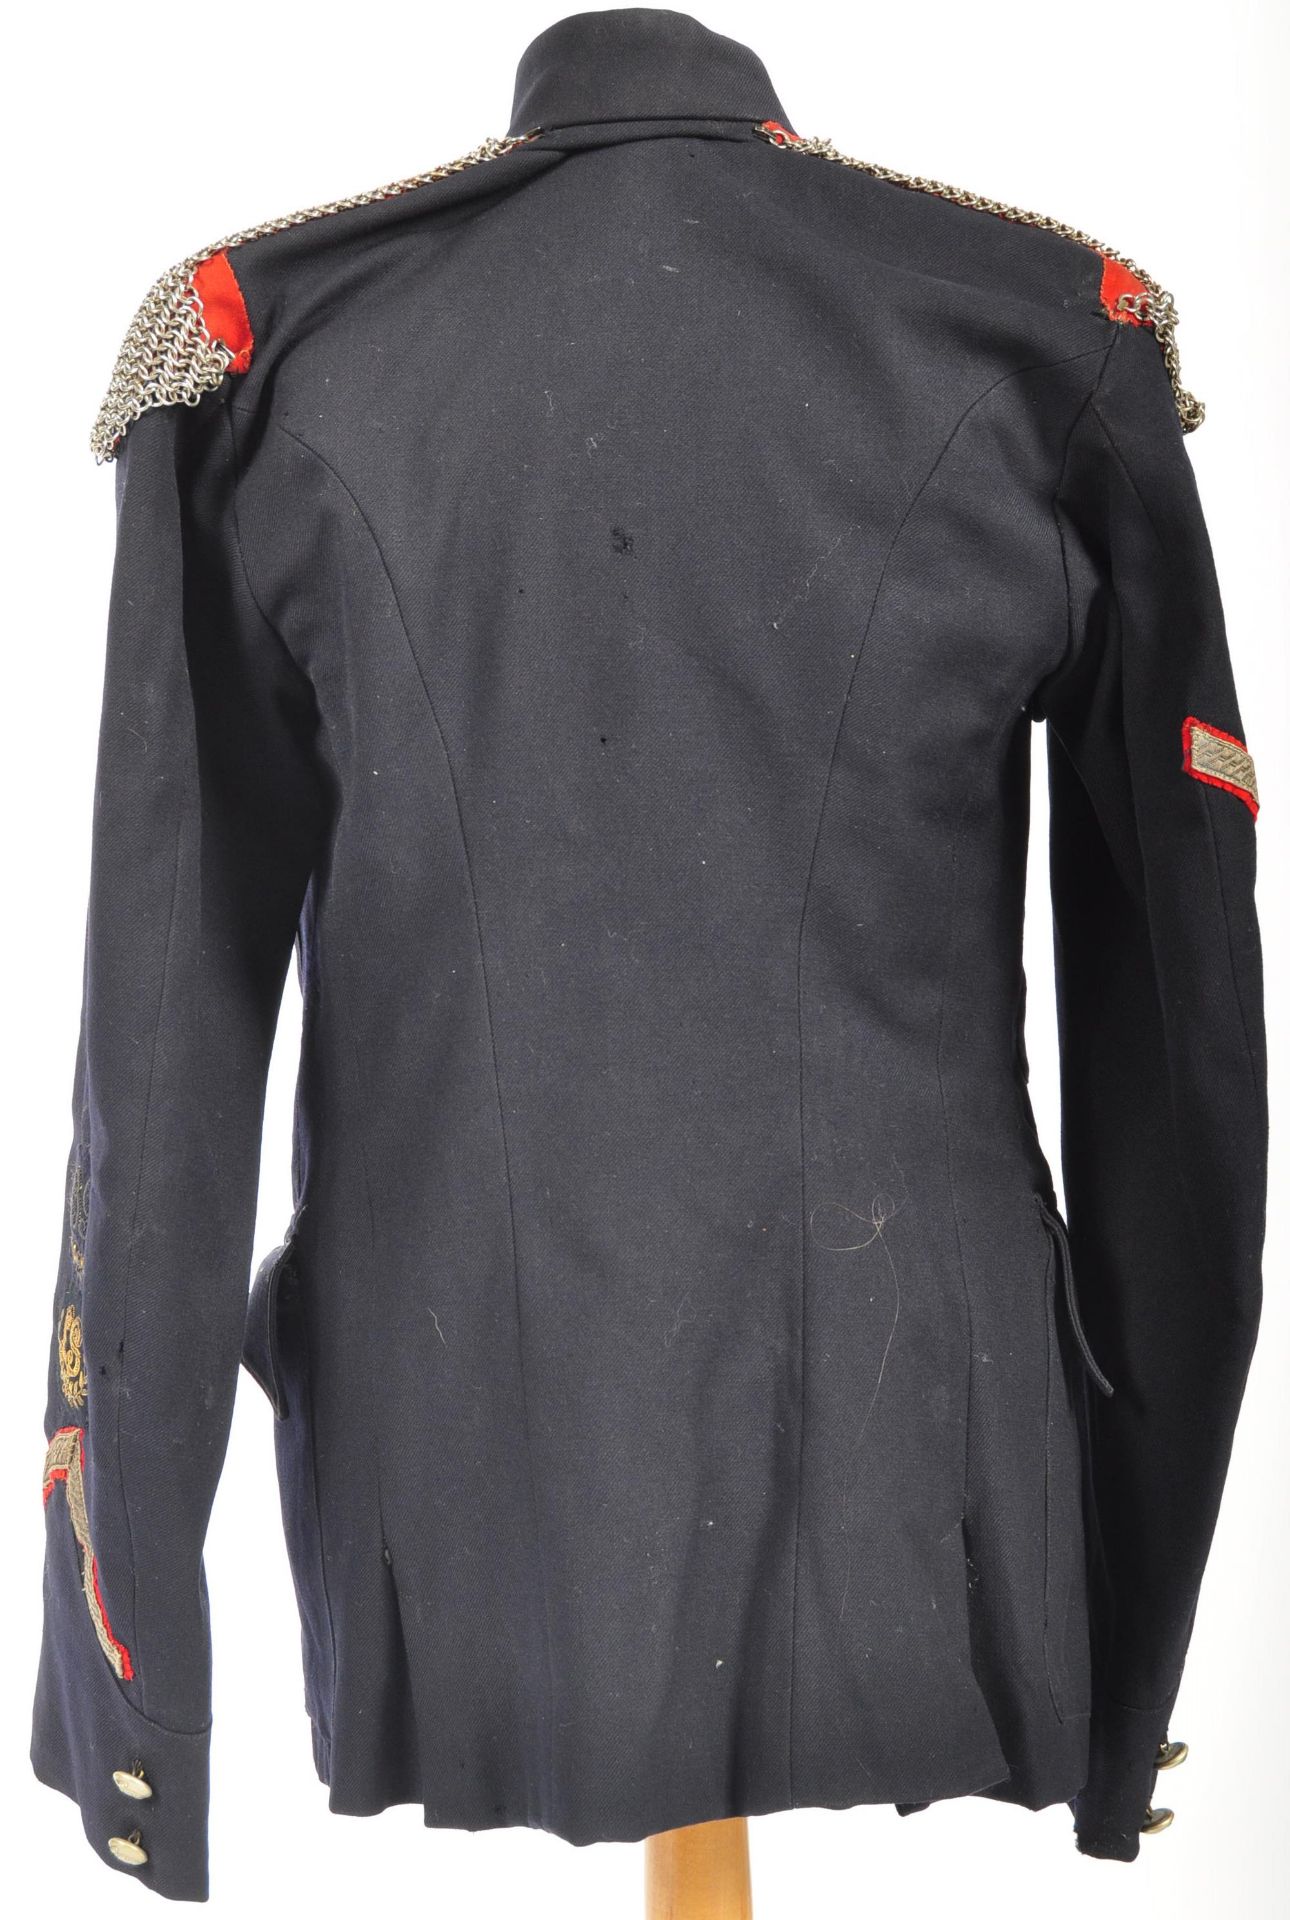 FIRST WORLD WAR BRITISH ARMY LEICESTERSHIRE YEOMANRY TUNIC - Image 2 of 6